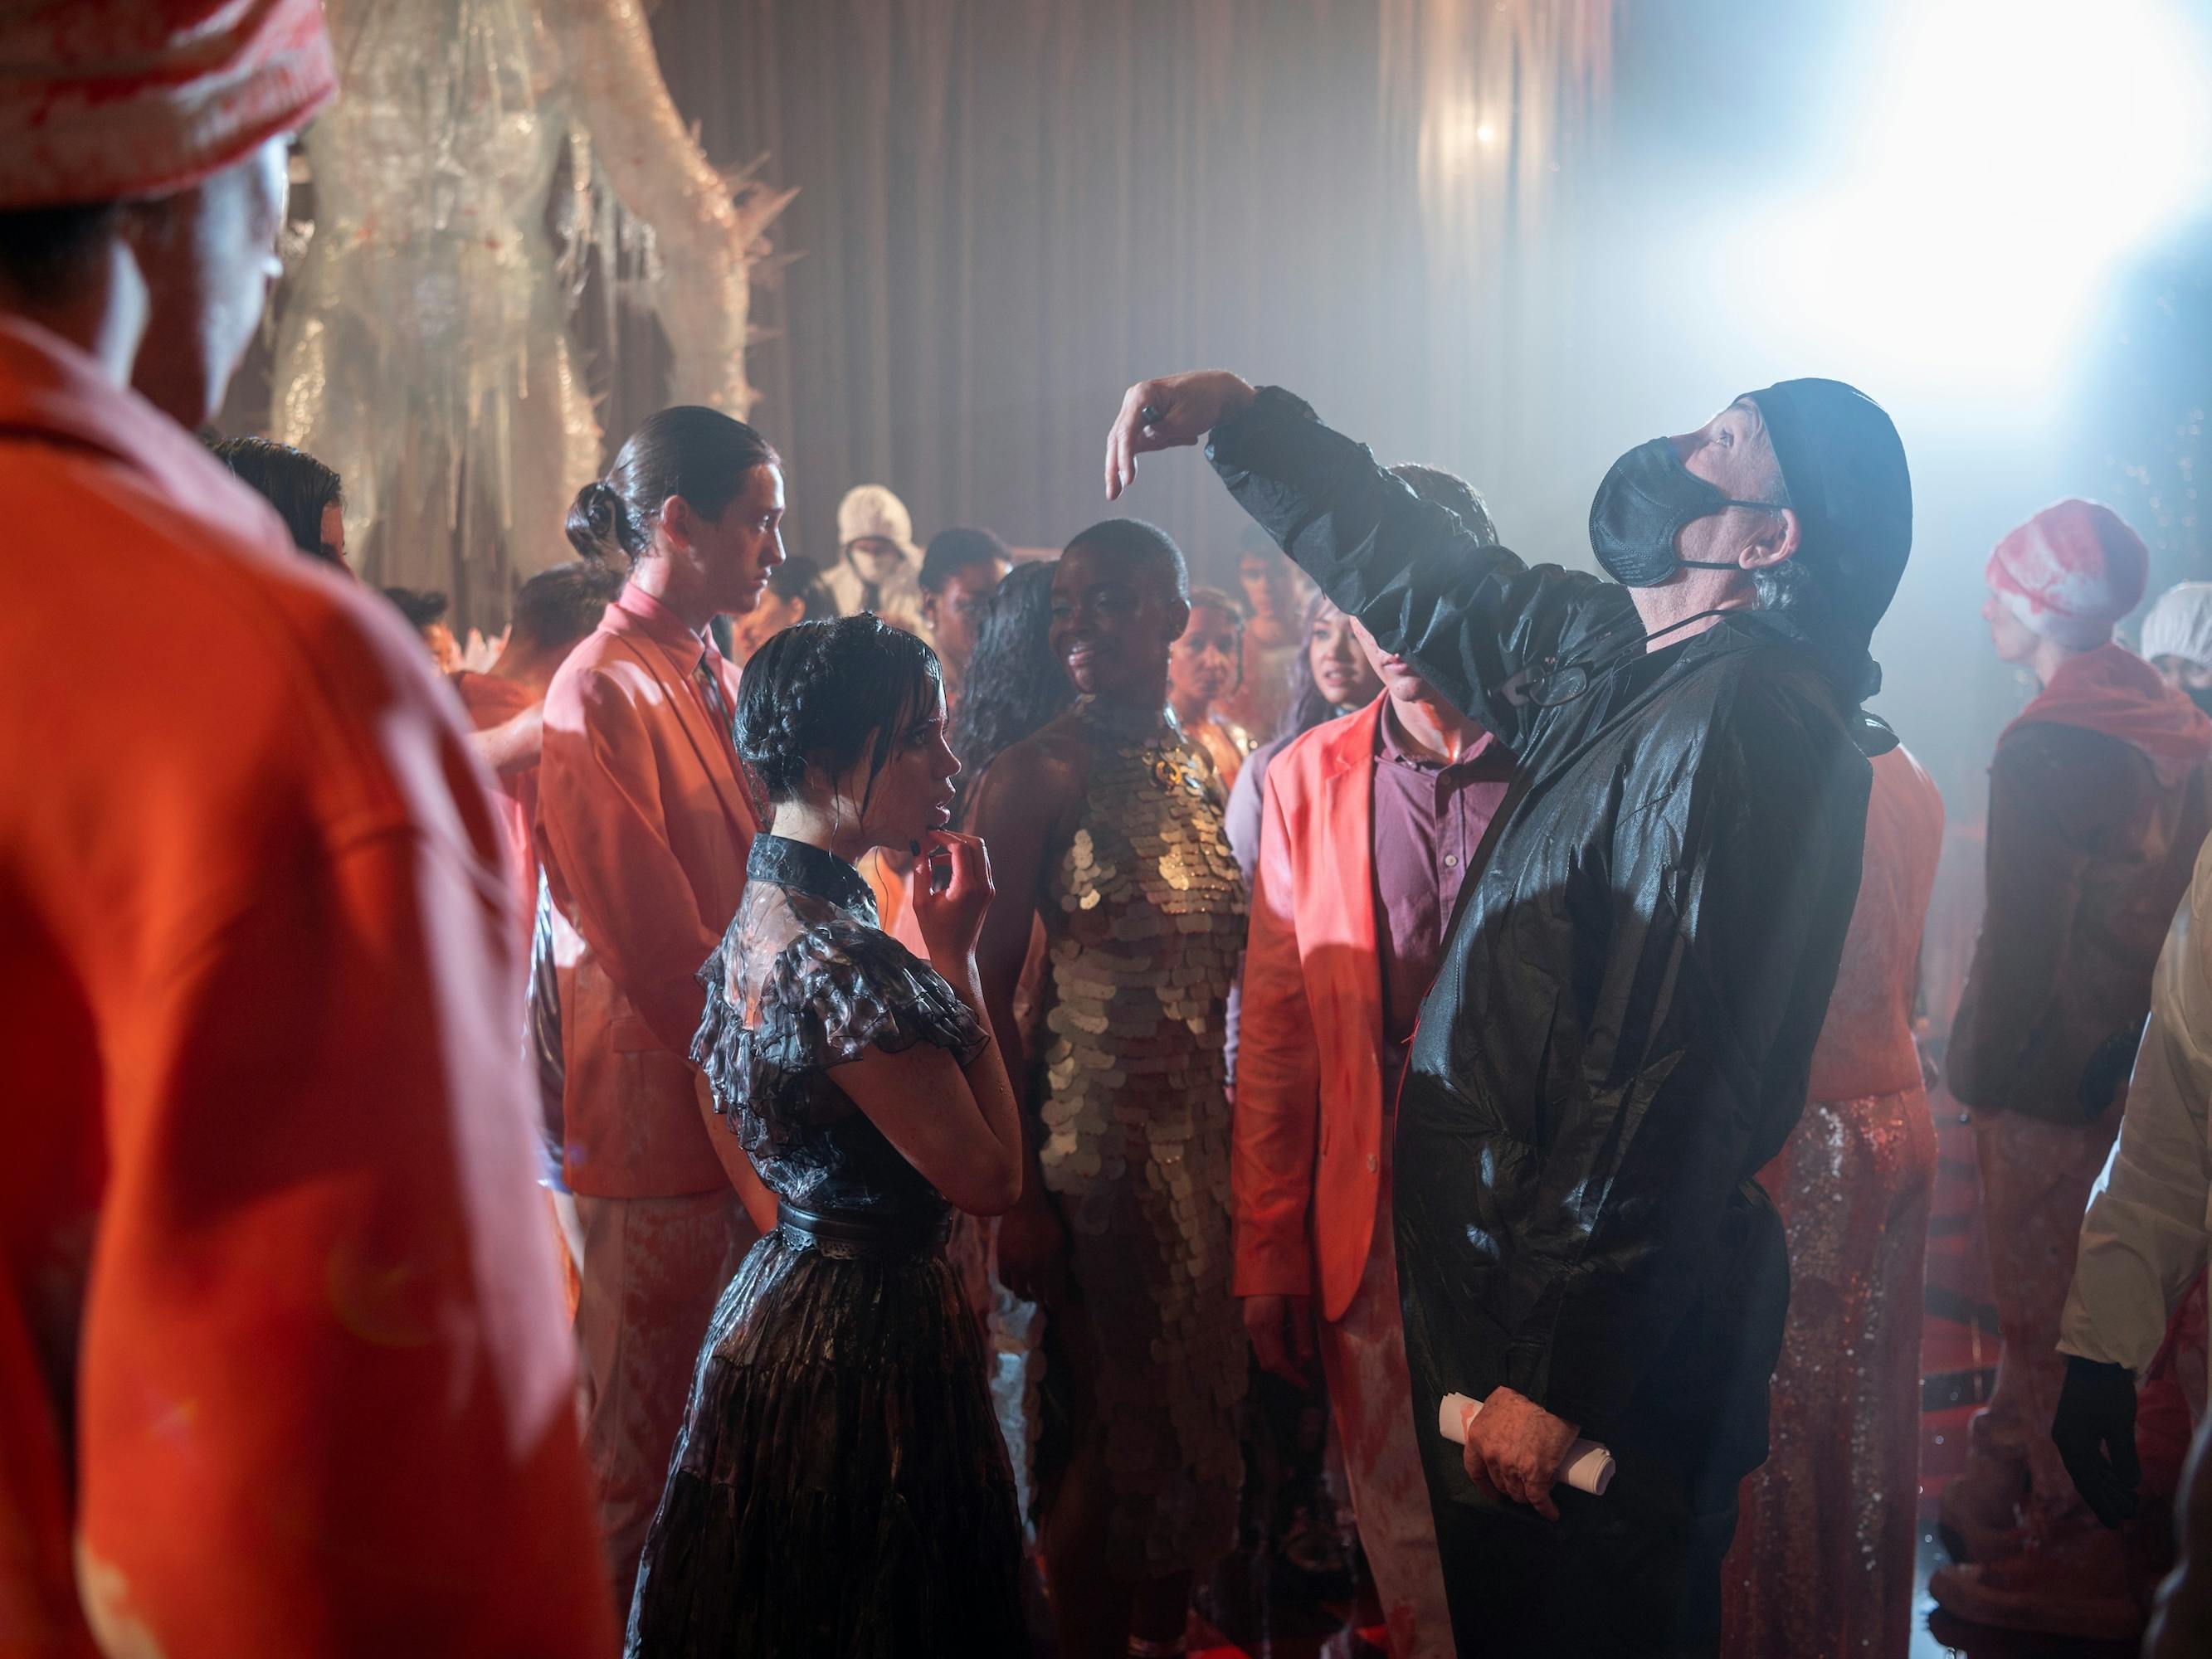 Wednesday Addams (Jenna Ortega) stands next to Tim Burton in a sea of people drenched in fake blood.